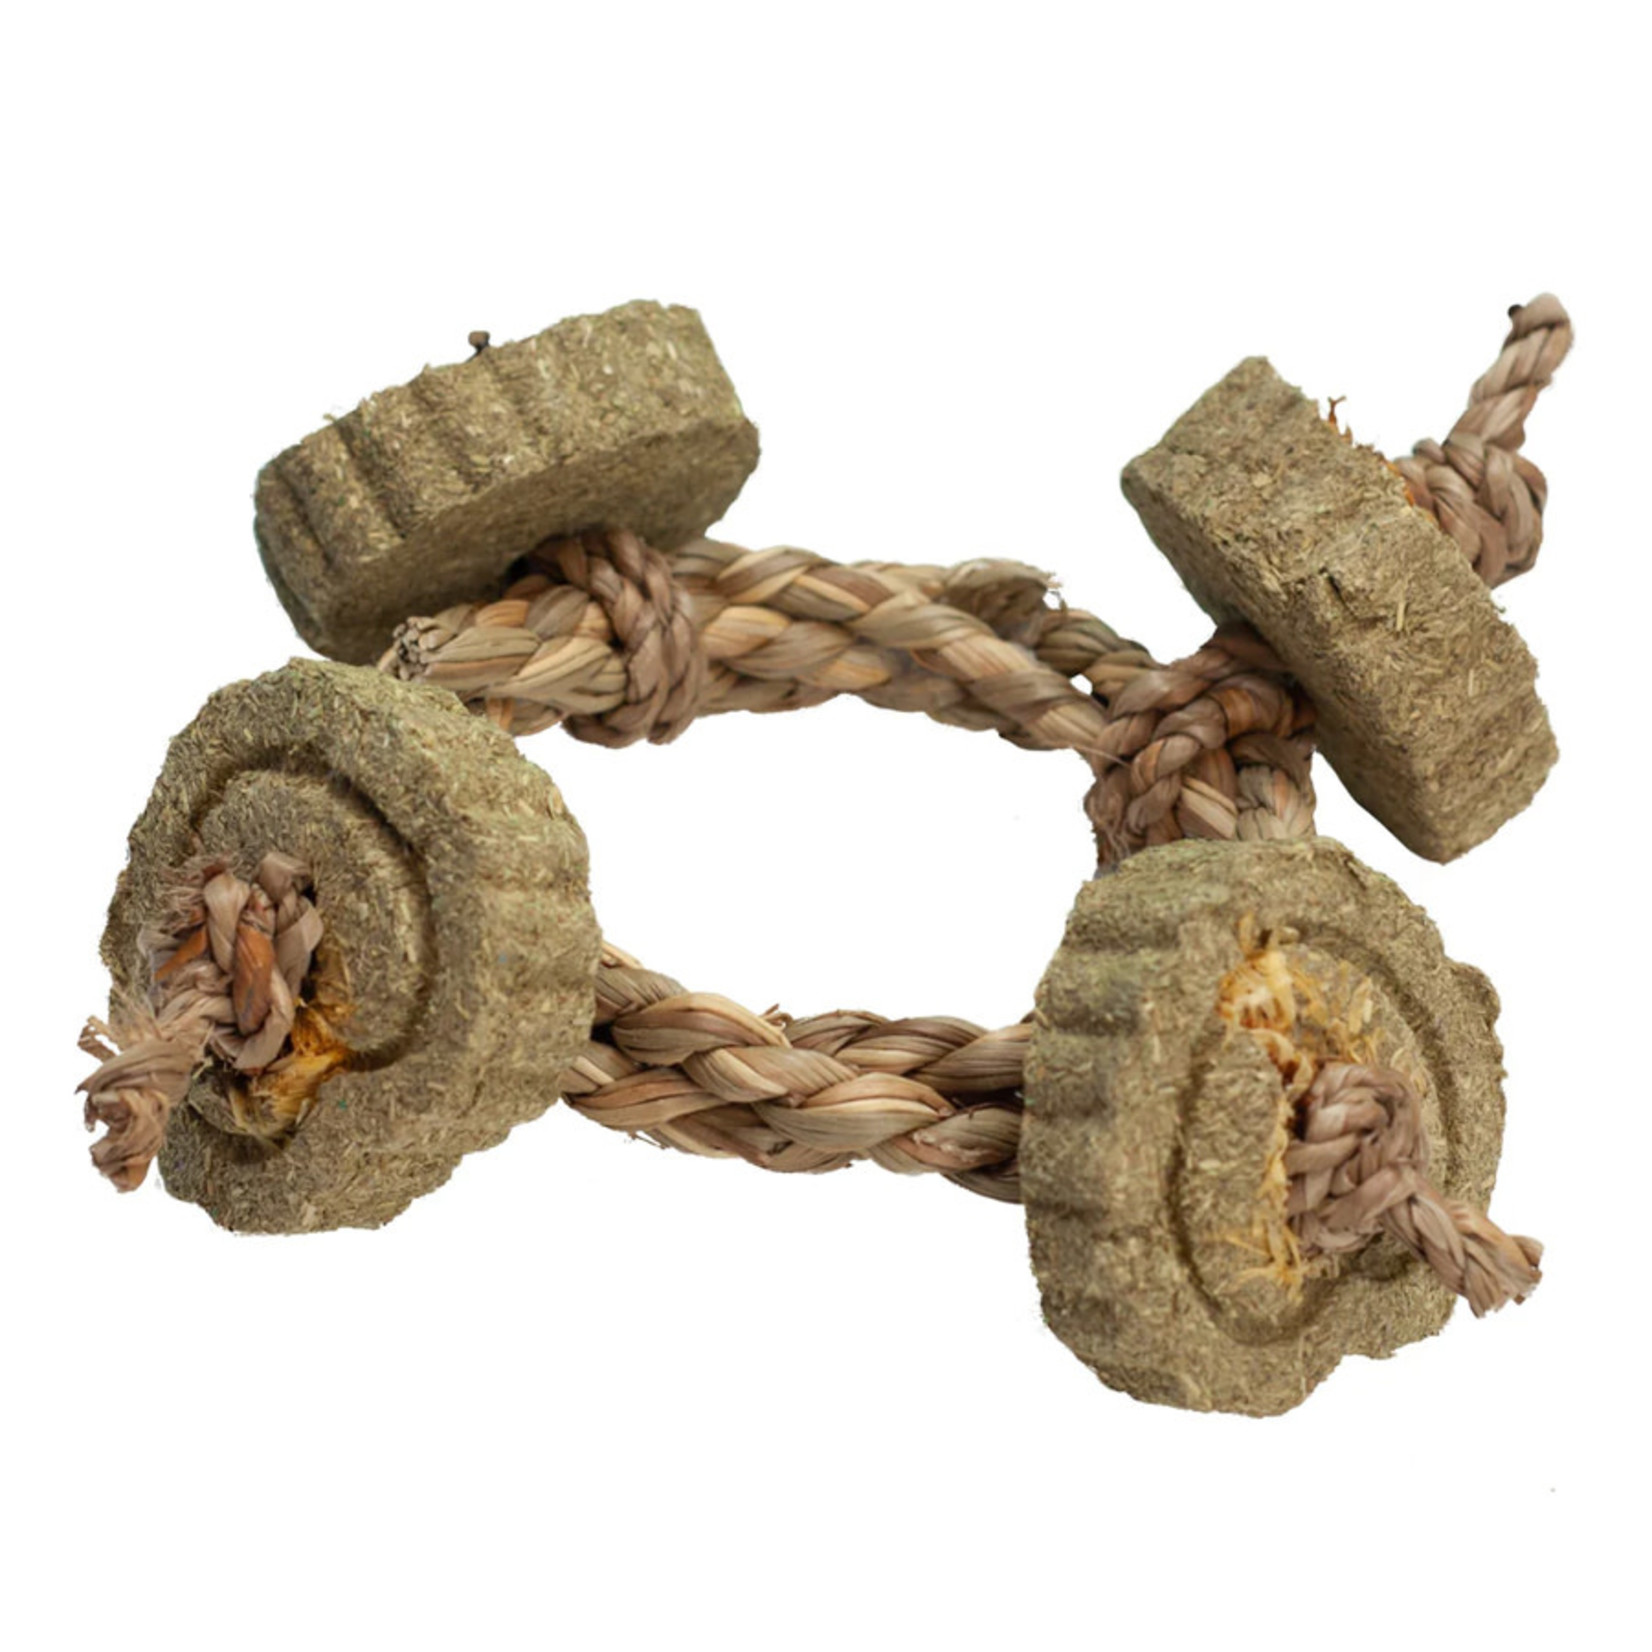 A&E Cage Company Timothy Hay Braided Rope Circle Chew Toy Nibbles